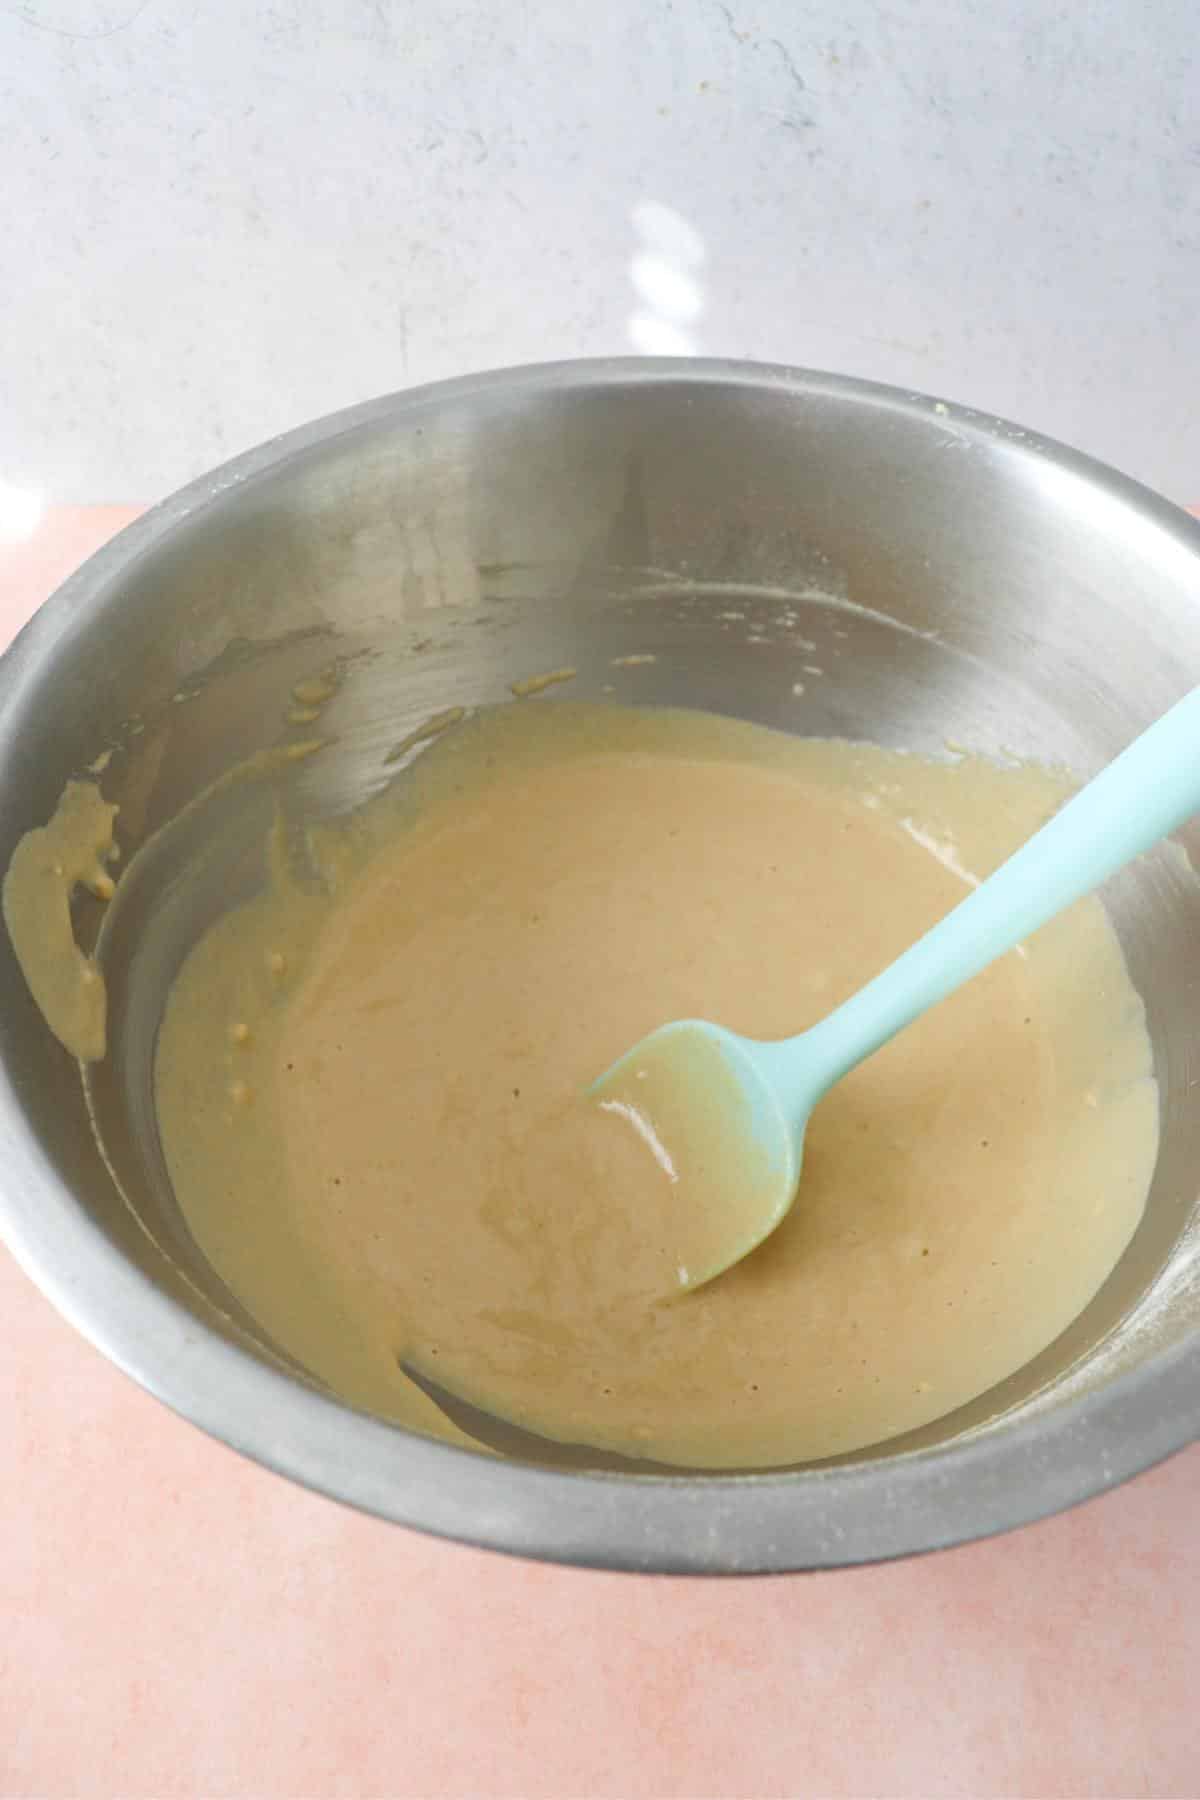 Vegan protein pancakes batter in a mixing bowl with a rubber spatula.